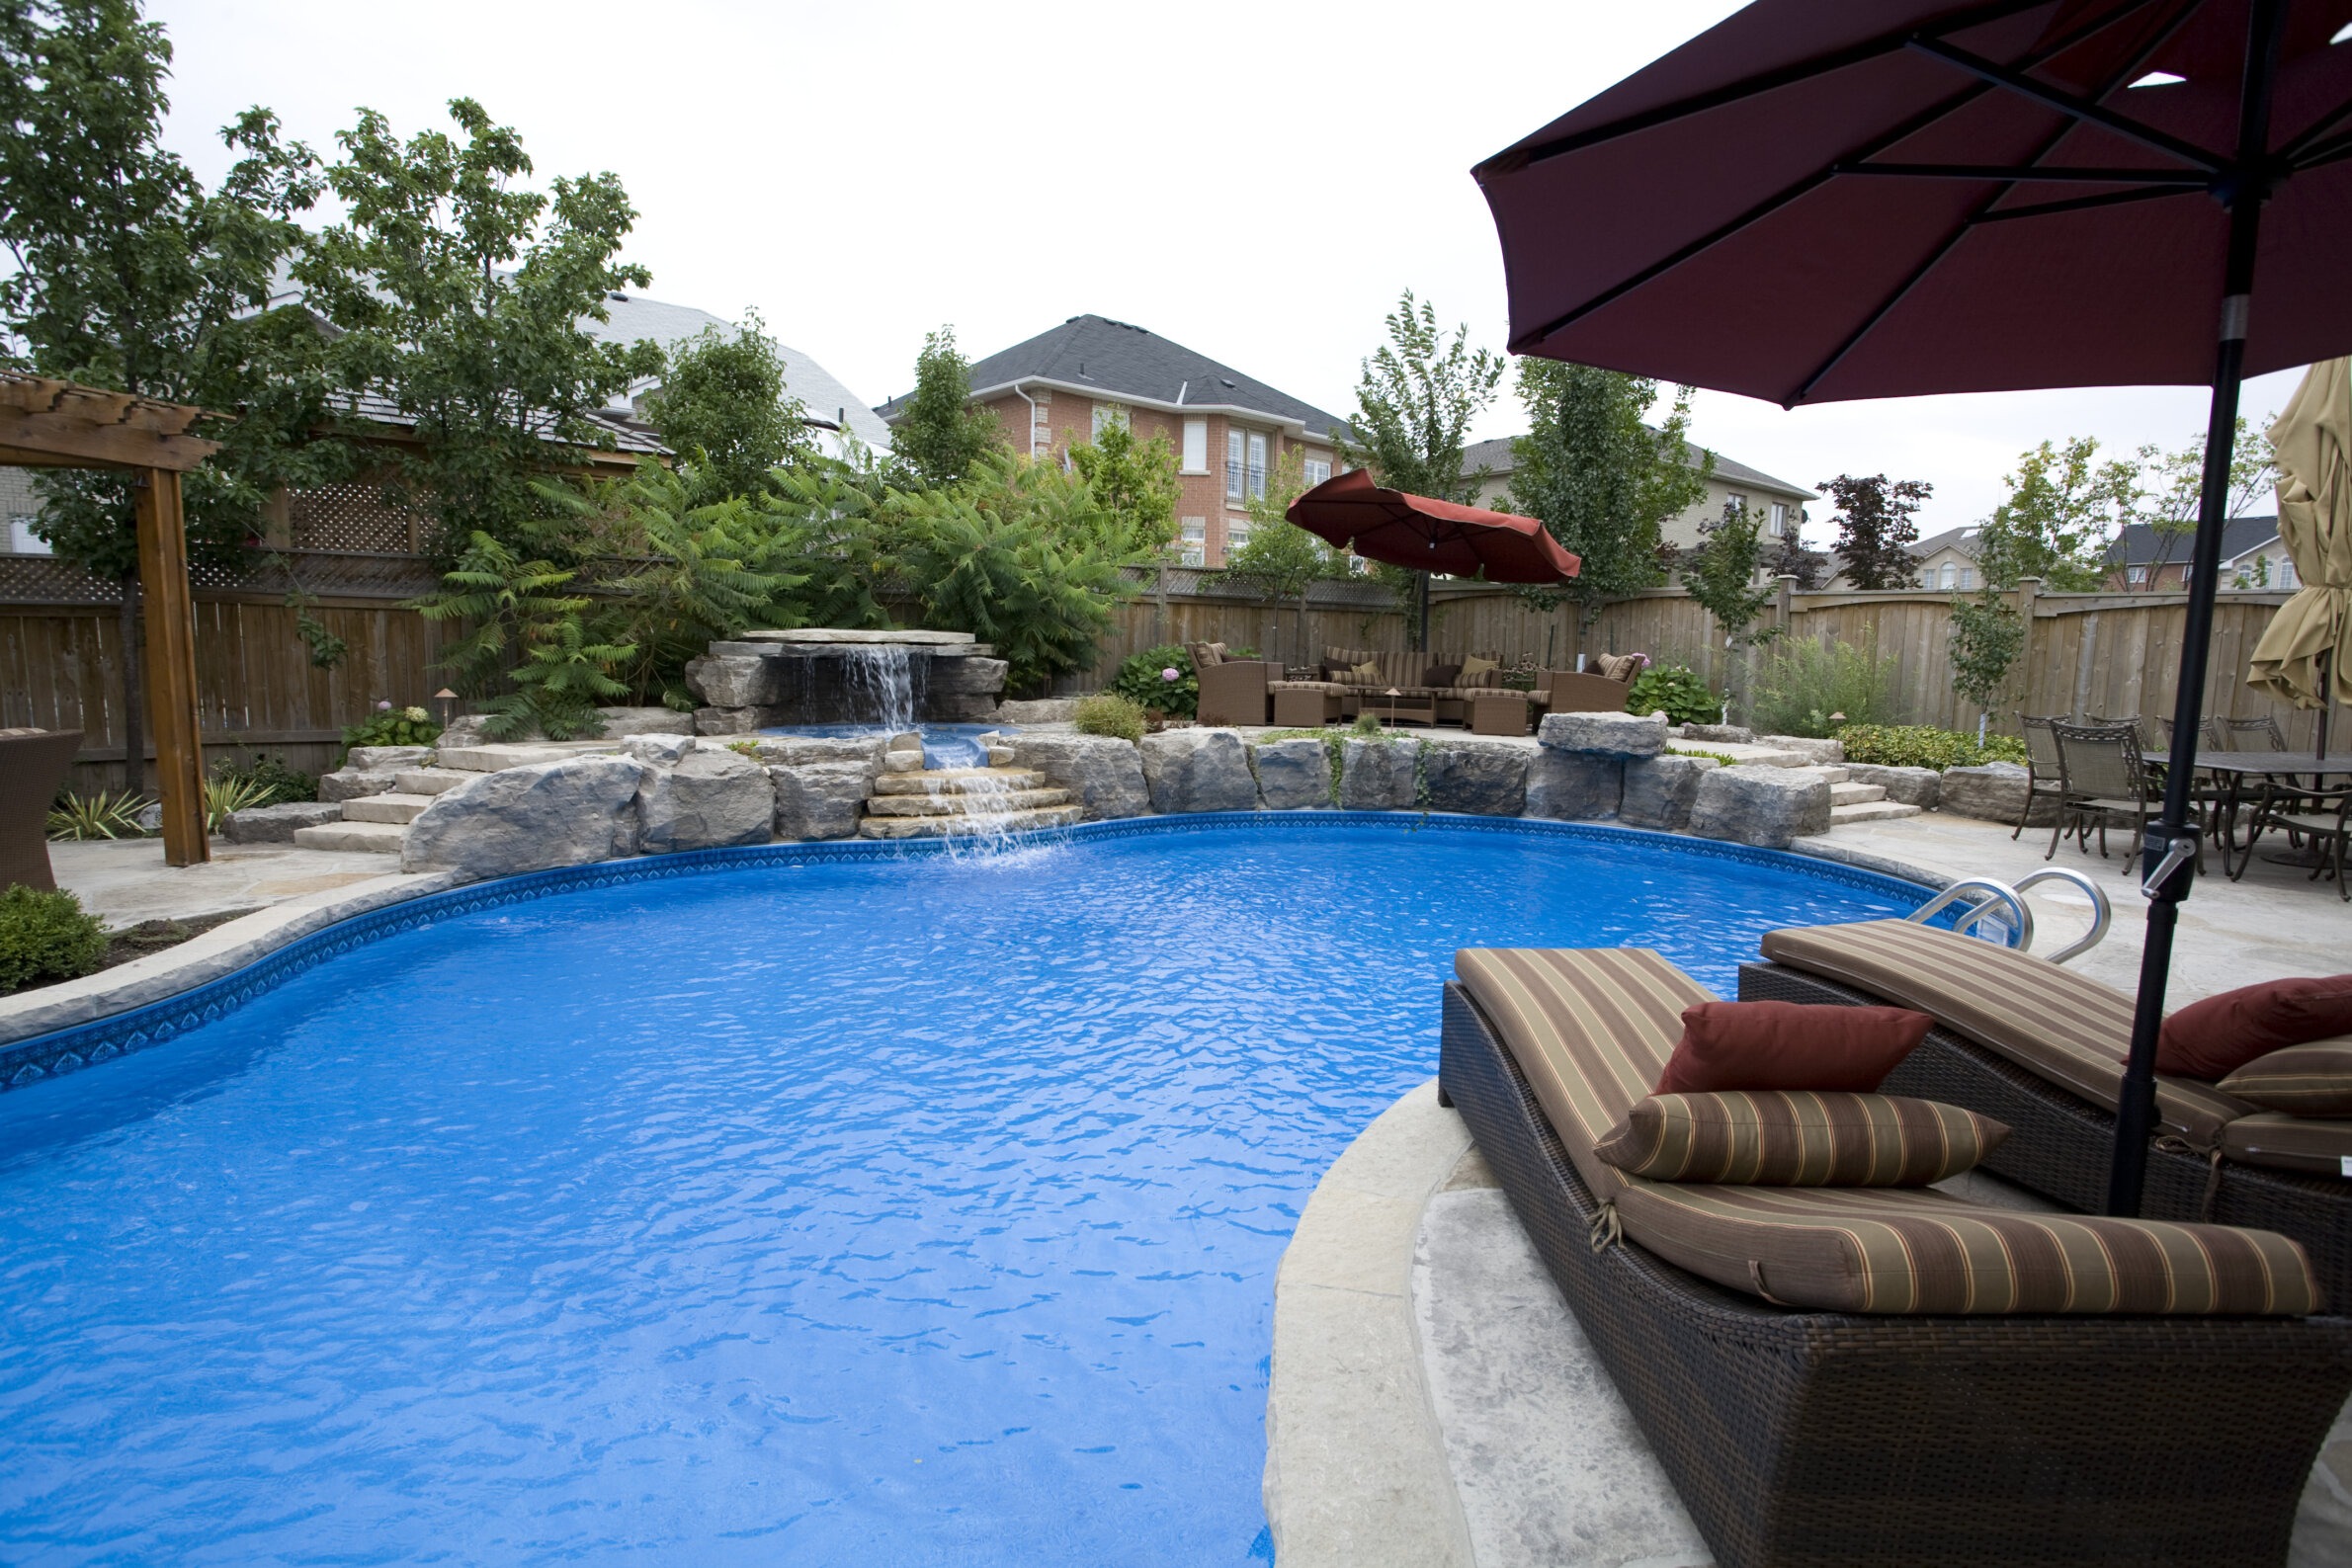 This image shows an inviting backyard with a curved swimming pool, waterfall feature, sun loungers, patio umbrellas, and landscaping against a wooden fence.